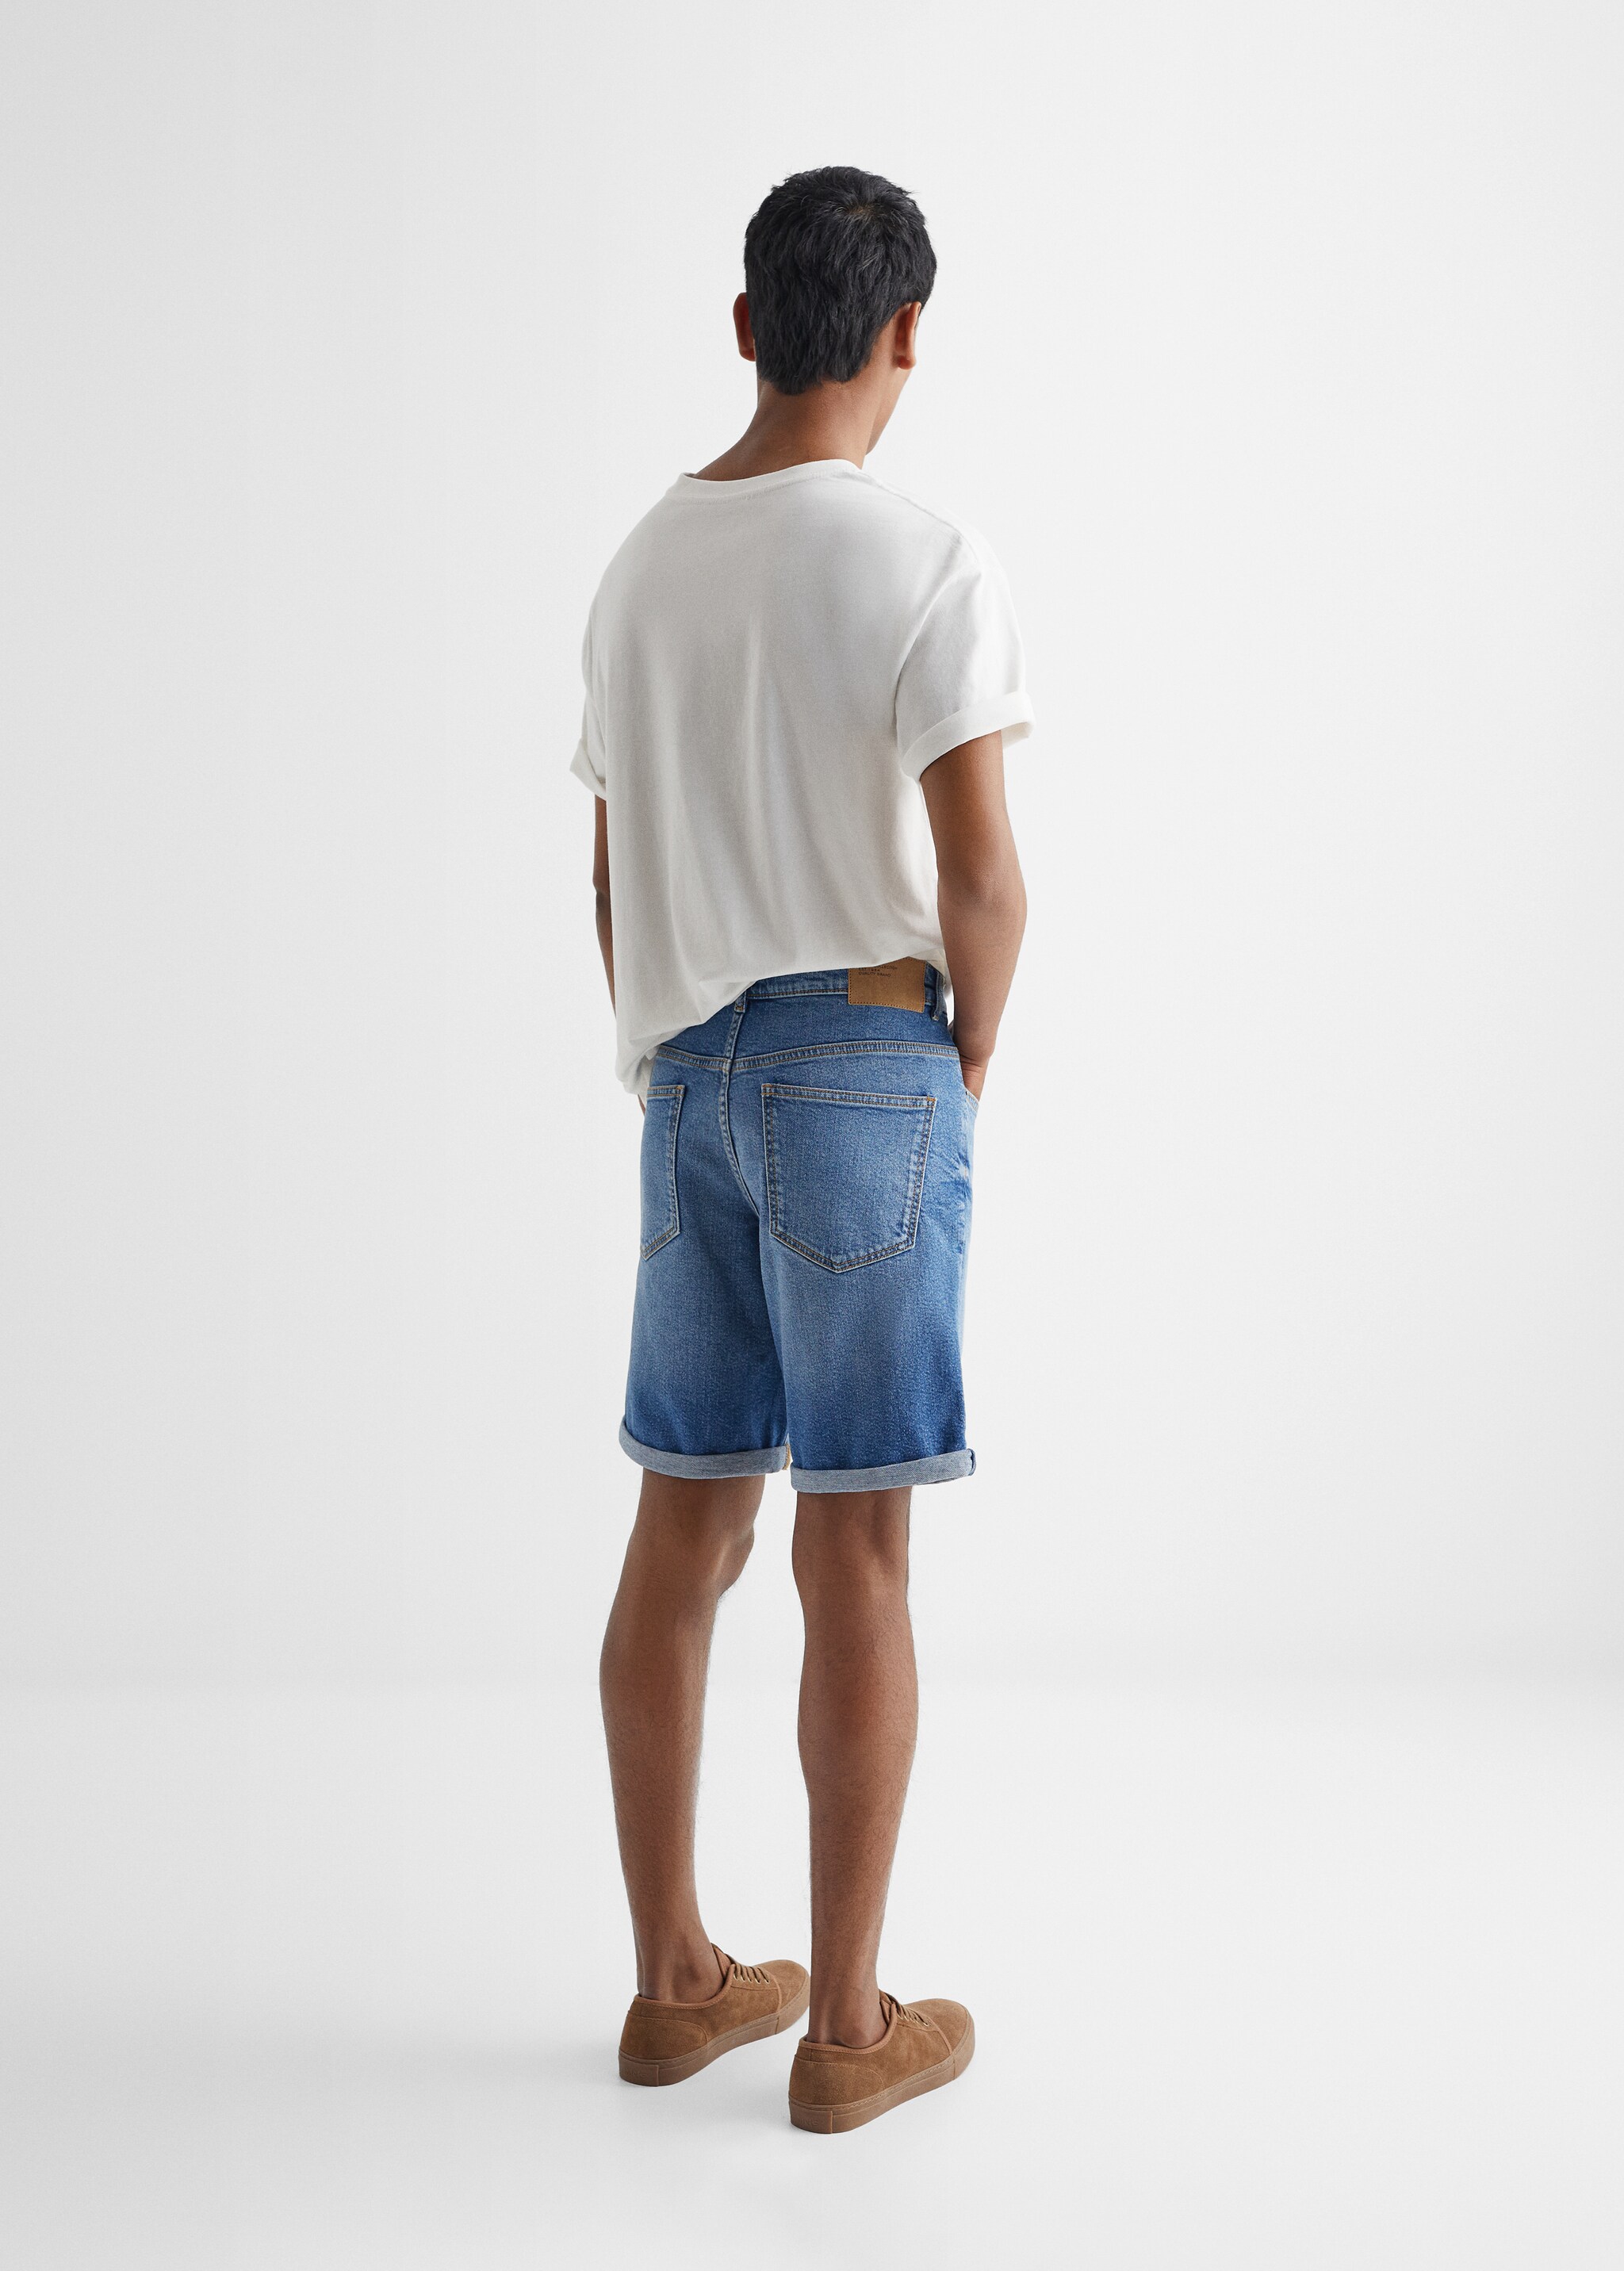 Cotton denim shorts - Reverse of the article